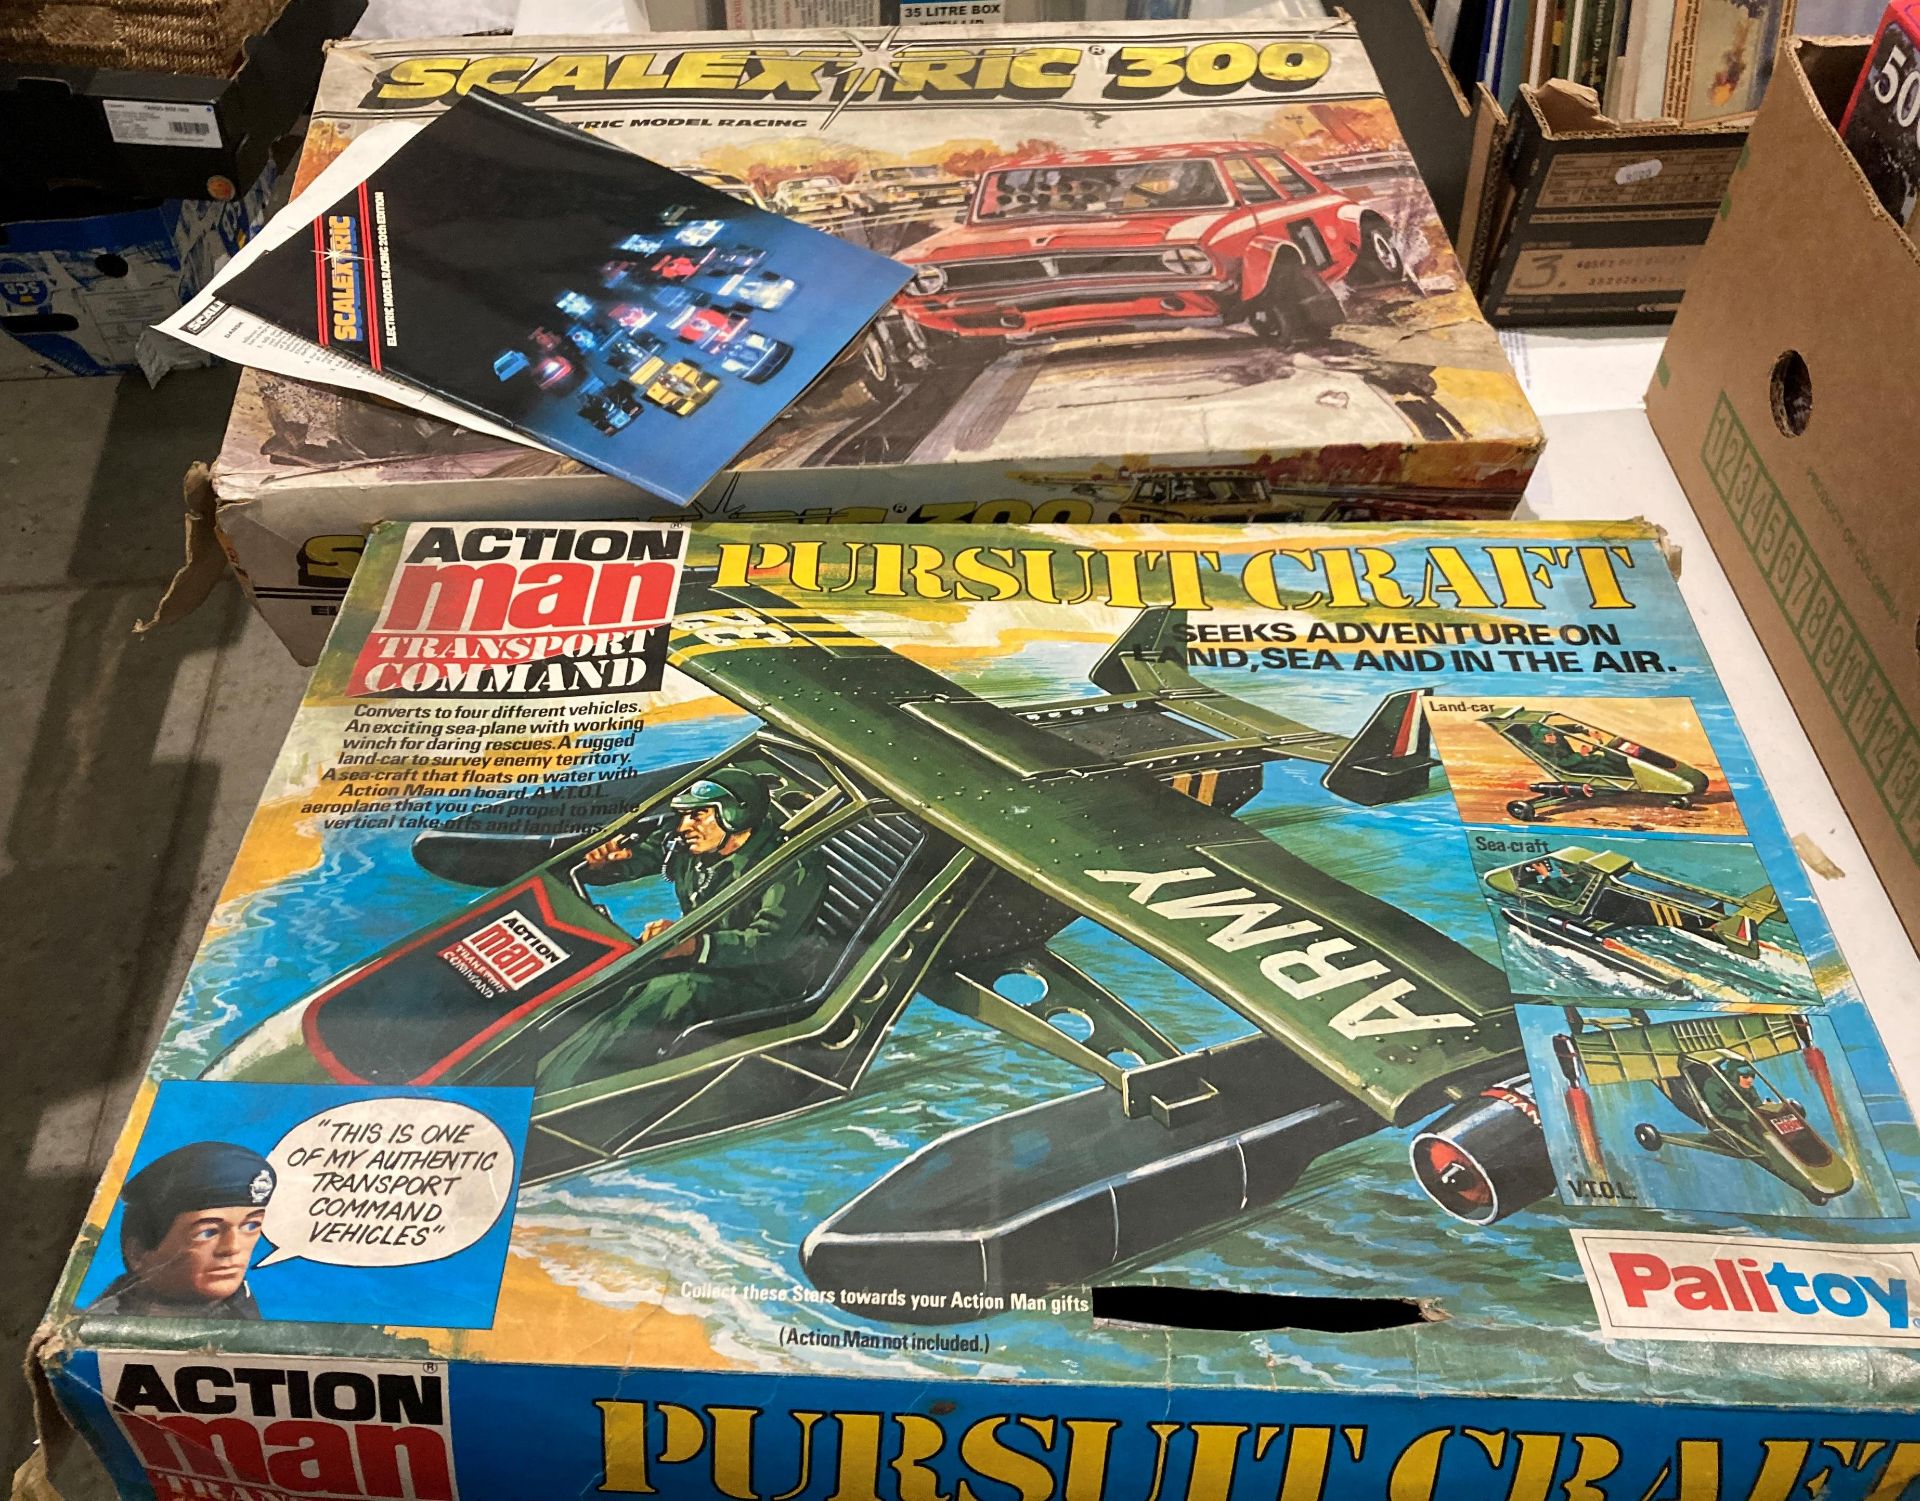 Two vintage boxed toys - Palitoy Action Man Transport Command Pursuit Craft Cat No: 34738 (maybe